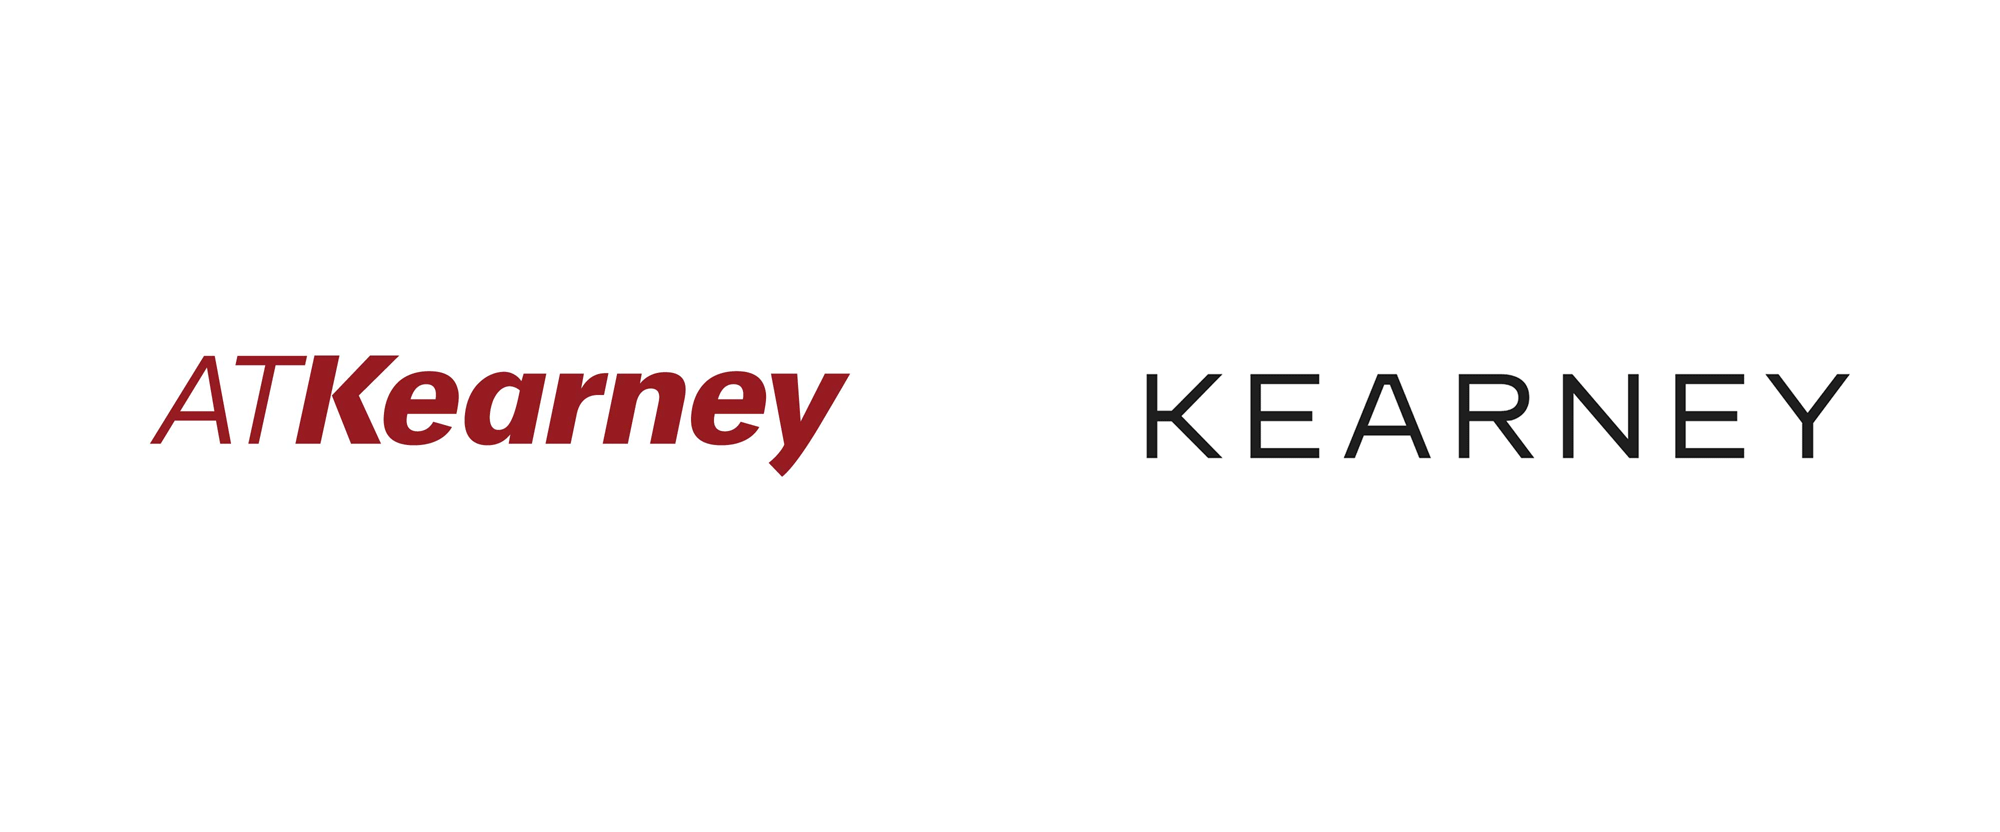 Brand New: New Logo and Identity for Kearney by Siegel+Gale